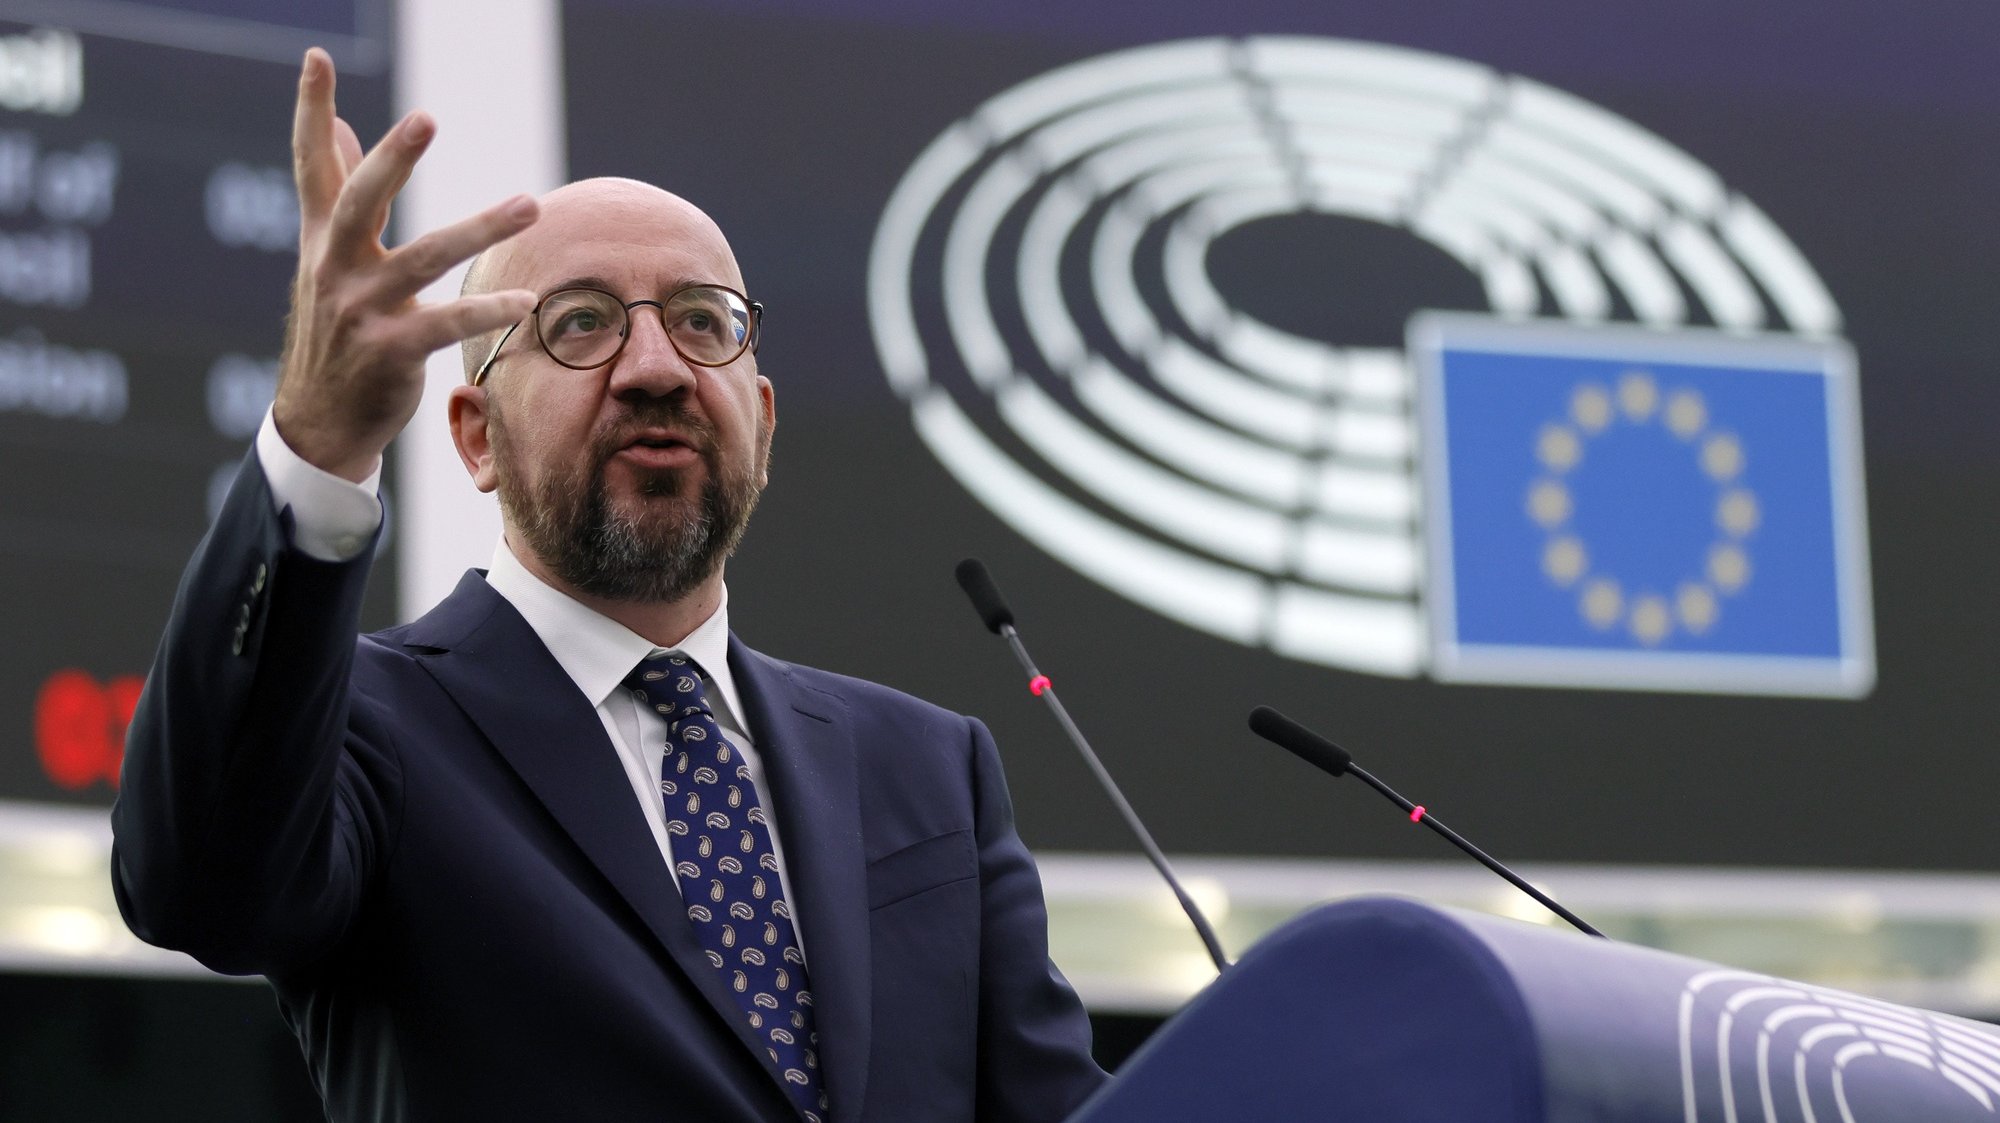 epa09873188 President of the European Council Charles Michel delivers a speech during a debate at the European Parliament in Strasbourg, France, 06 April 2022. The European Parliament on 06 April will review the results of the European Council held on 24 and 25 March, focusing on the latest developments of the war in Ukraine and the EU sanctions against Russia.  EPA/RONALD WITTEK